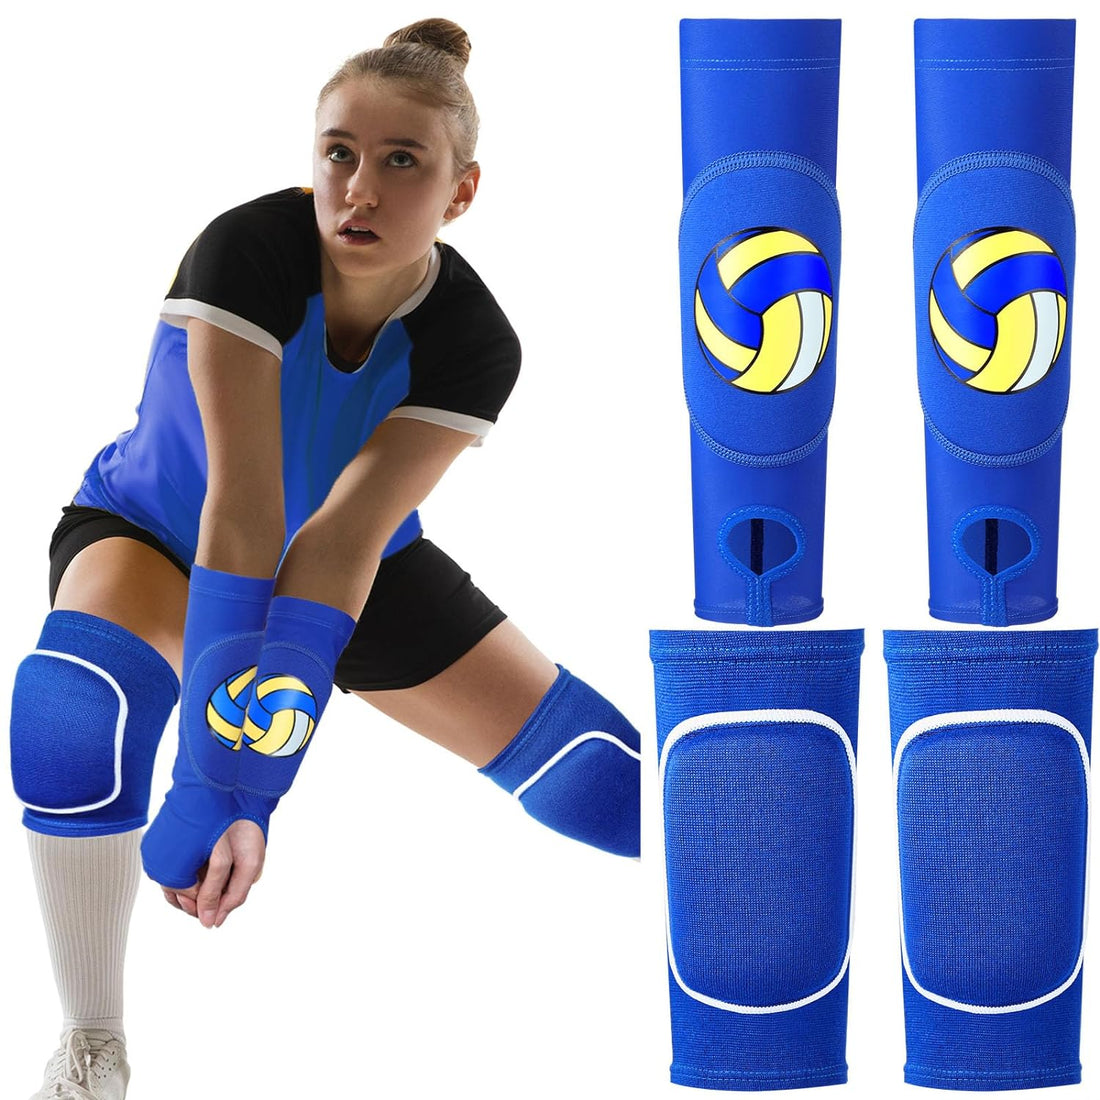 Aoriher Volleyball Knee Pads and Volleyball Arm Sleeves with Protection Pad Forearm Elbow Sleeve with Thumb Hole Volleyball Accessories for Teen Girls Women Youth Teen Basketball, Age 8-14 (Blue)